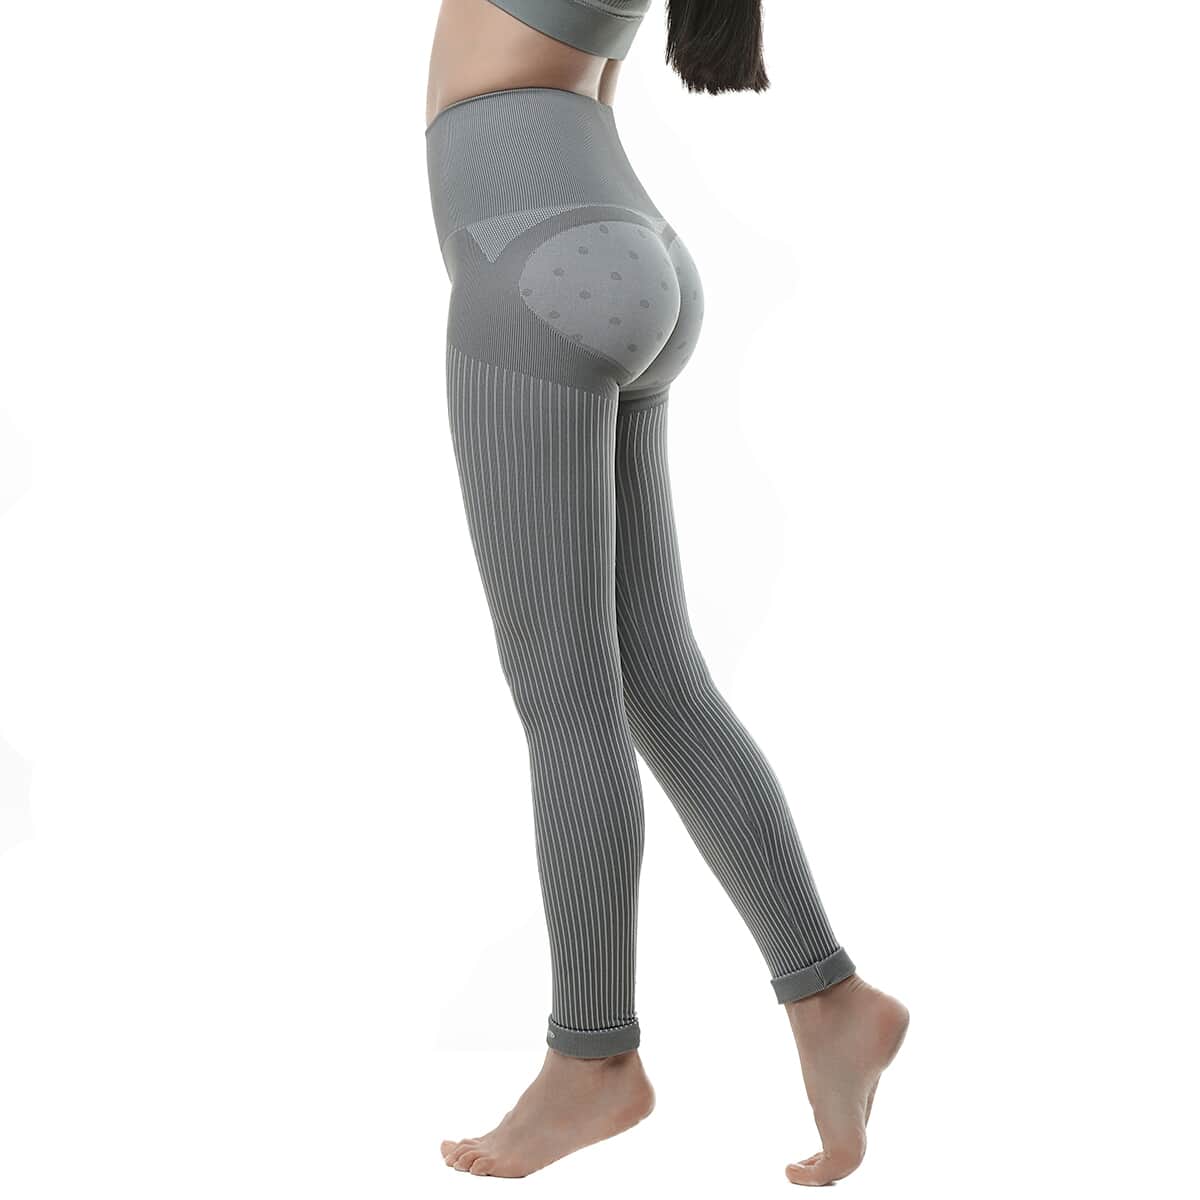 SANKOM Patent Gray Posture And Shaper Leggings For Women With Bamboo Fibers - XS/S image number 1